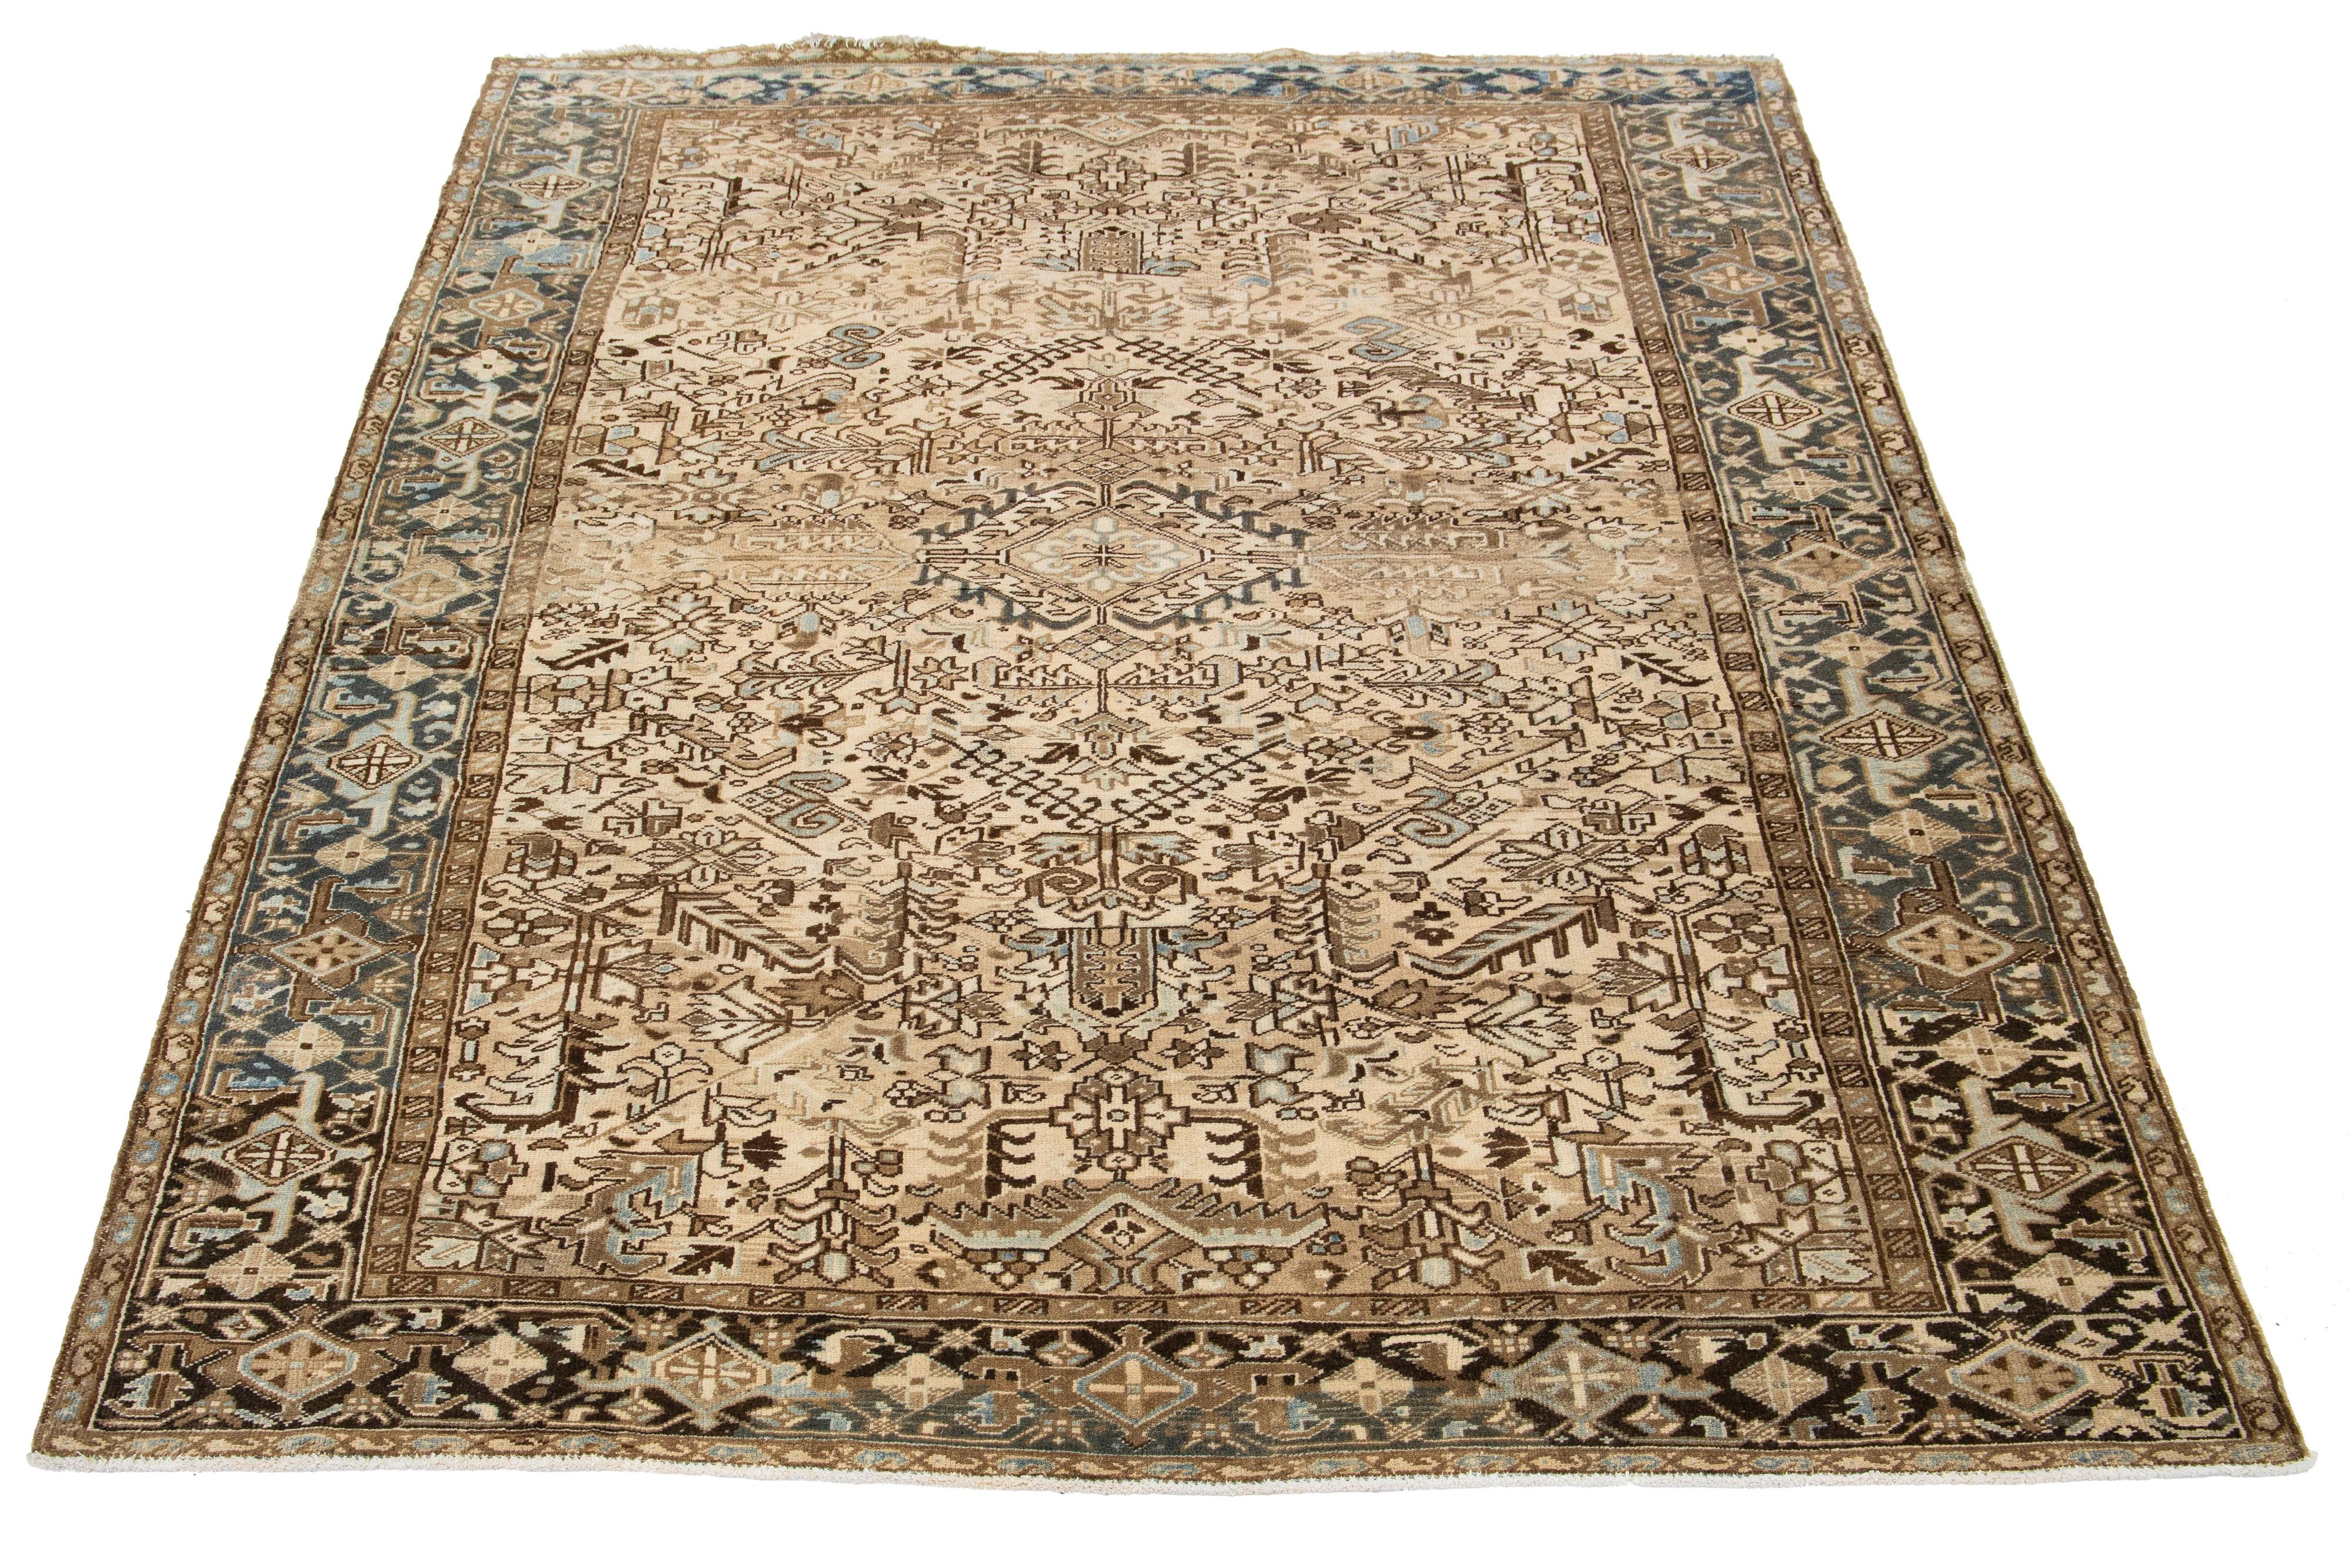 This hand-knotted antique Persian rug, made from wool, features a tan field with an all-over blue and brown pattern.

This rug measures 8'2' x 11'2